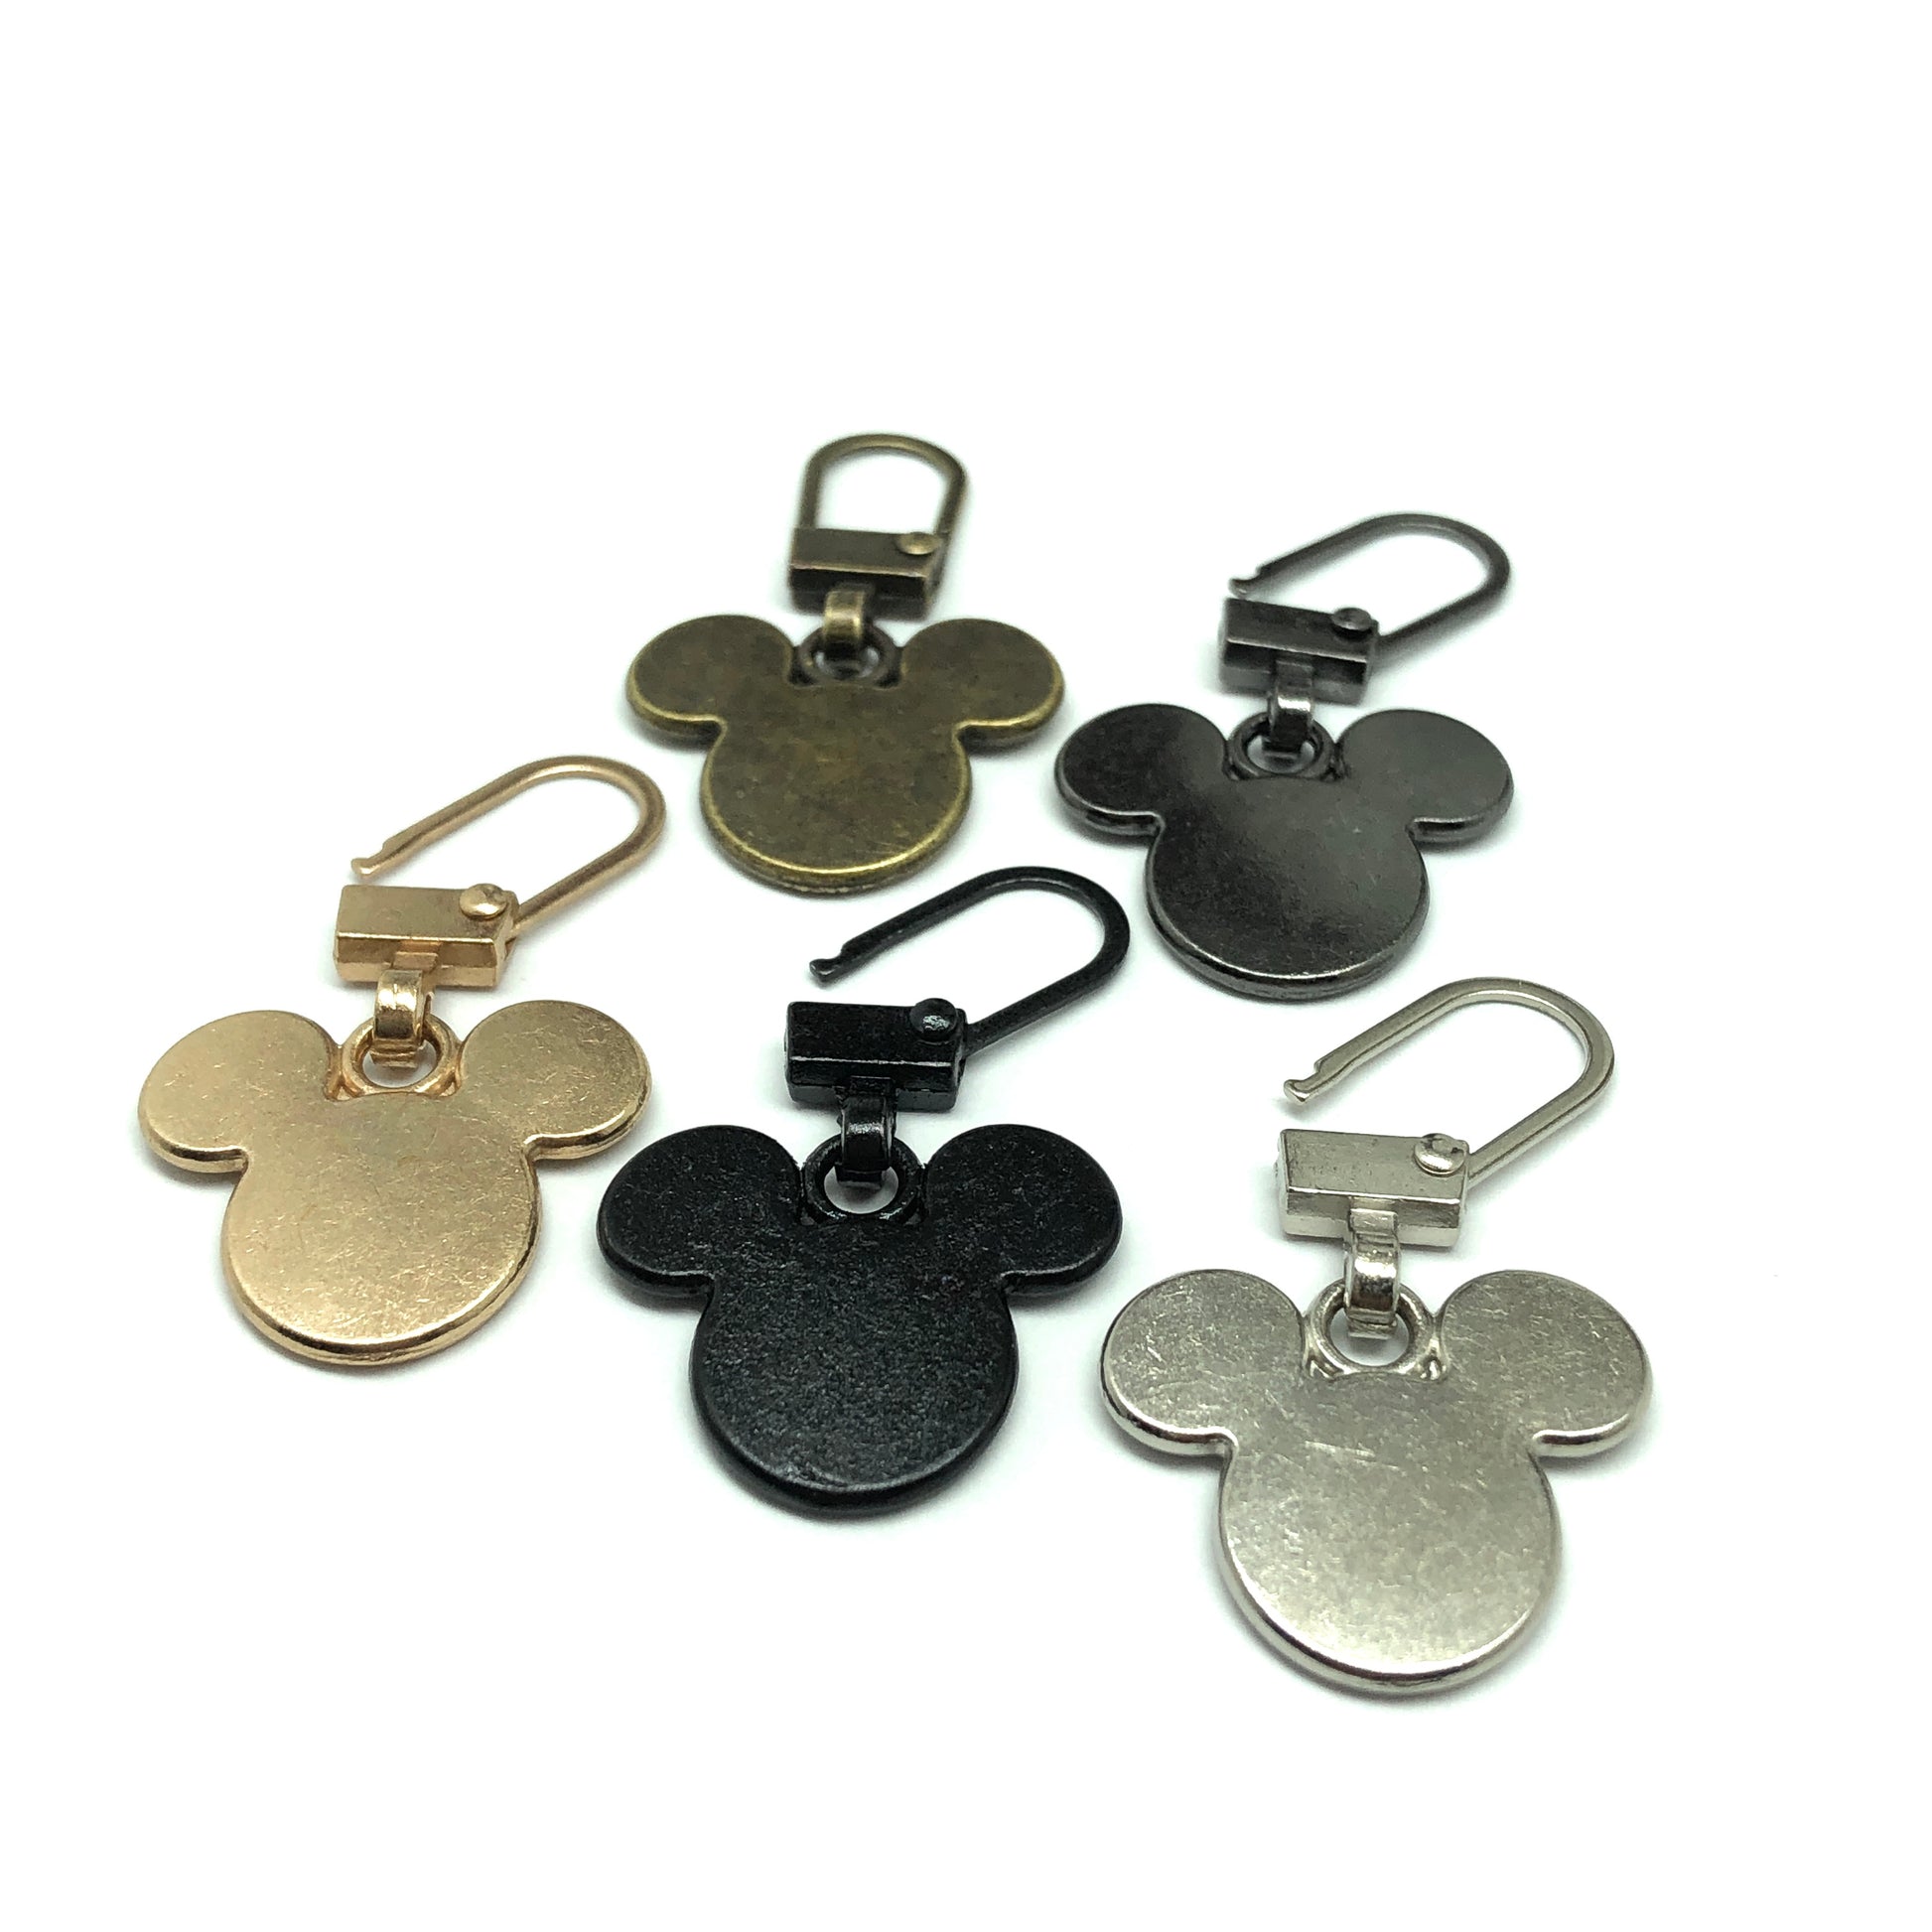 Mickey Mouse Silhouette Charm - Zipper Pull Charm for Repair or Decorative Shoe, Purse, Keychain & More | Crafting Supply Accessories